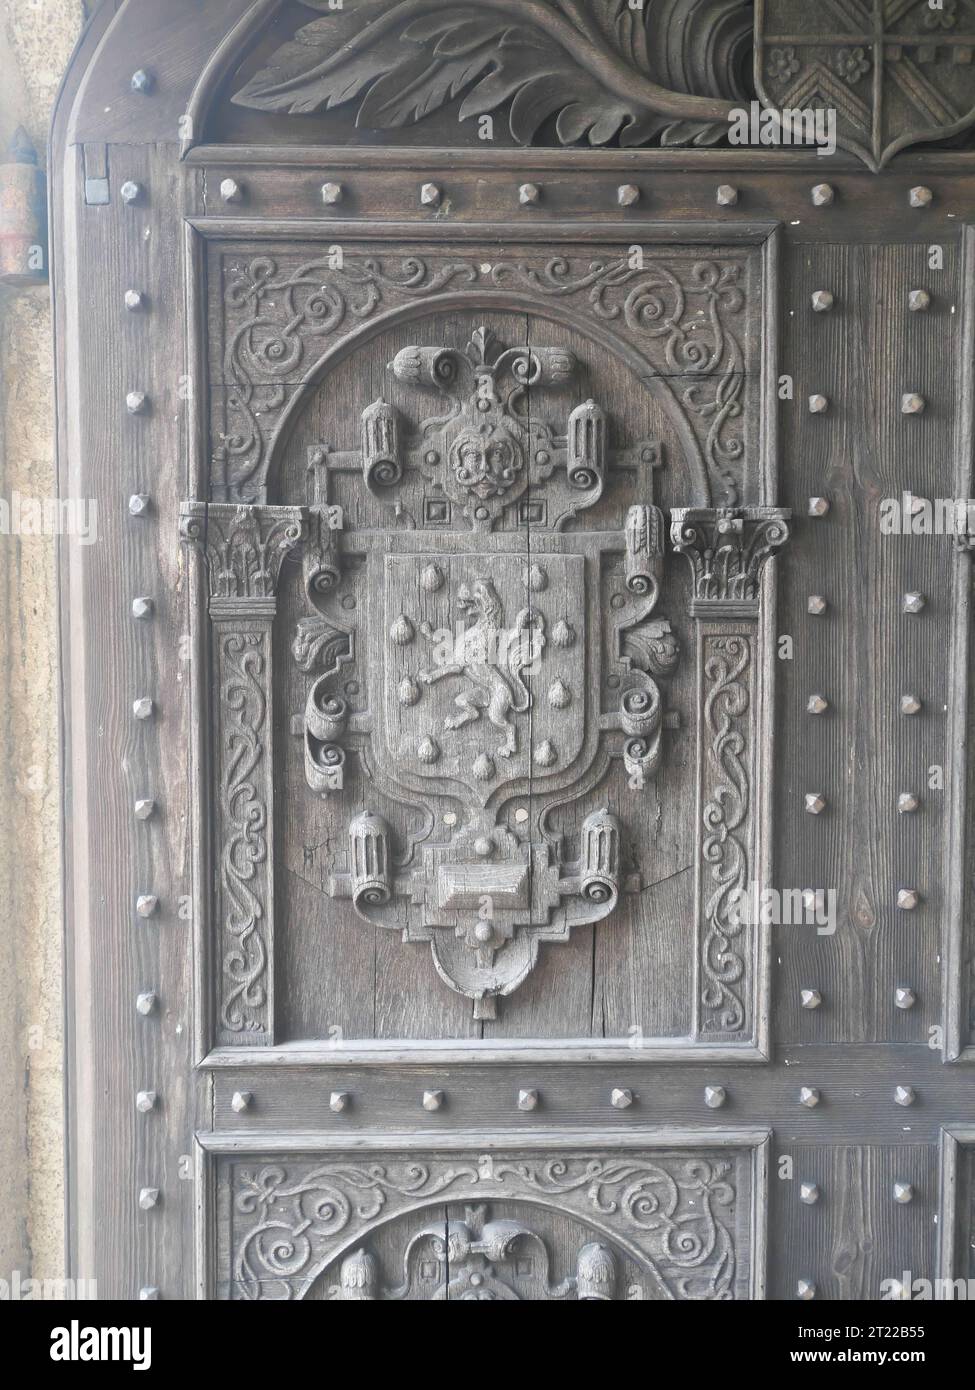 Detail of wooden door with coat of arms at the entrance to Lanhydrock manor house in Cornwall England Stock Photo